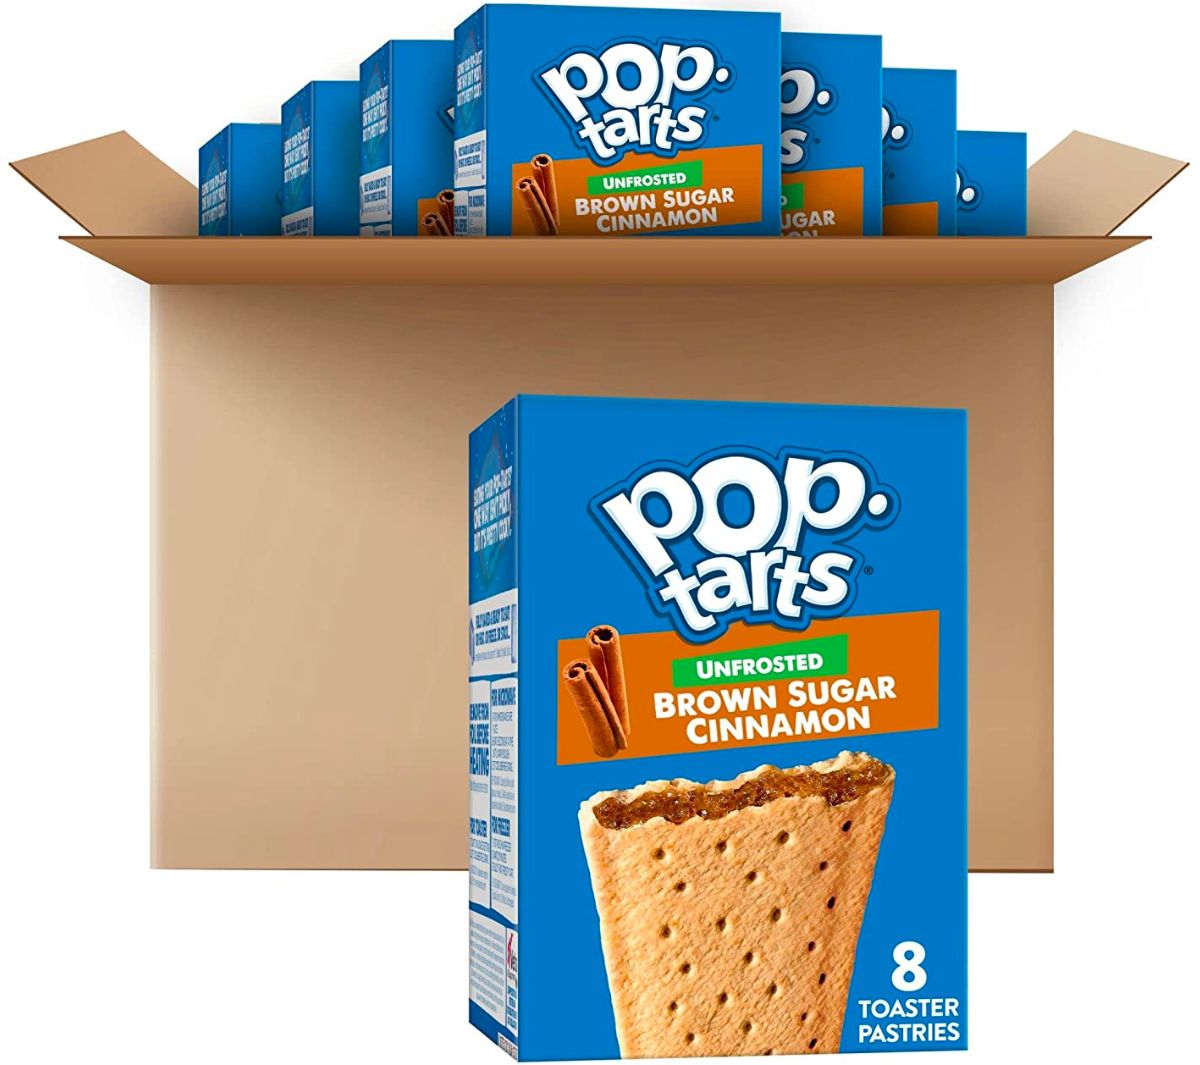 4 boxes of unfrosted brown sugar cinnamon poptarts